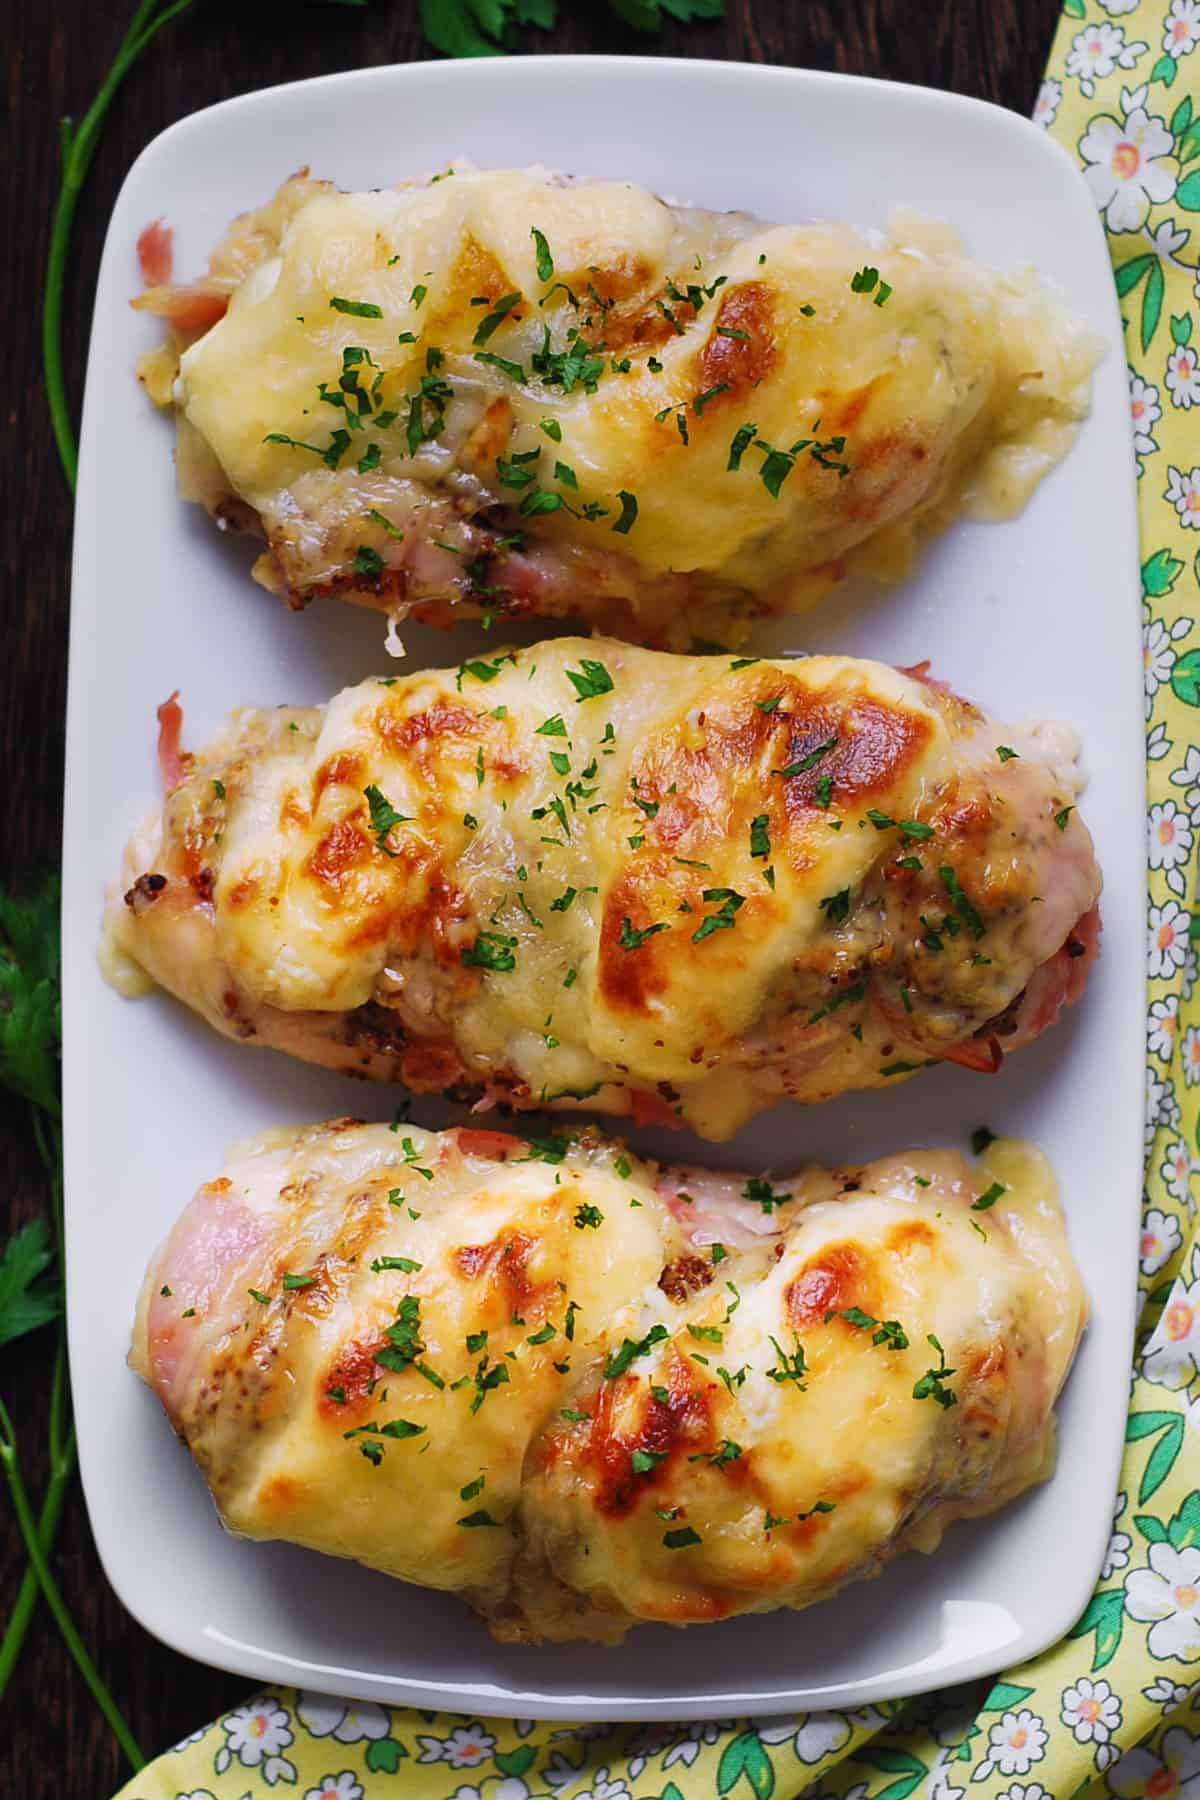 Chicken Cordon Bleu Bake (chicken breasts with layers of ham and Swiss cheese) - on a plate.